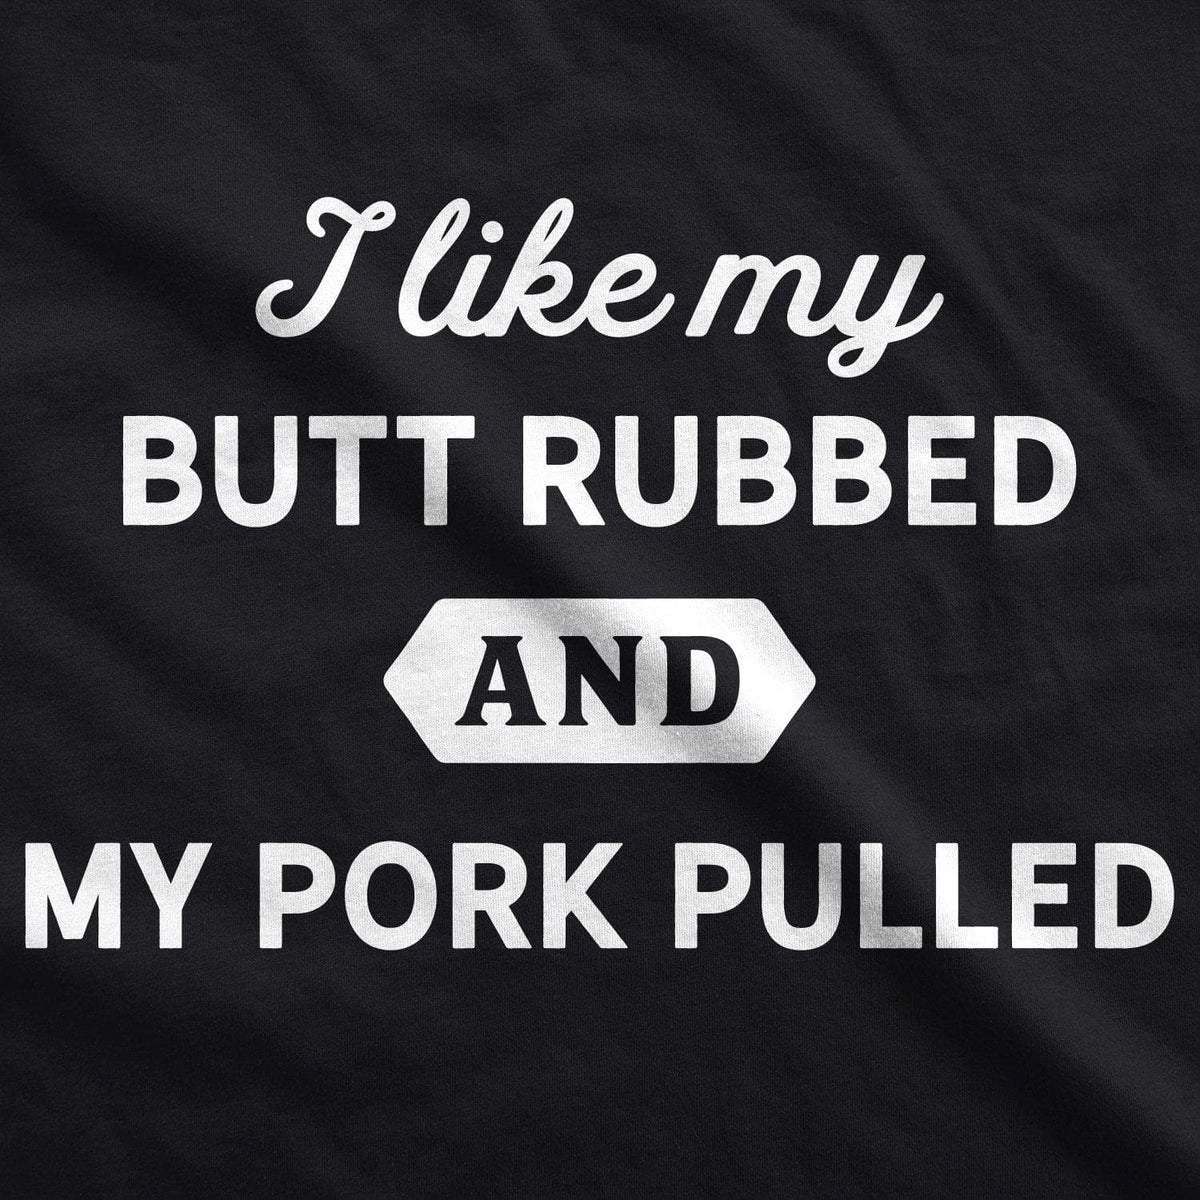 I Like My Butt Rubbed And My Pork Pulled Men&#39;s Tshirt  -  Crazy Dog T-Shirts